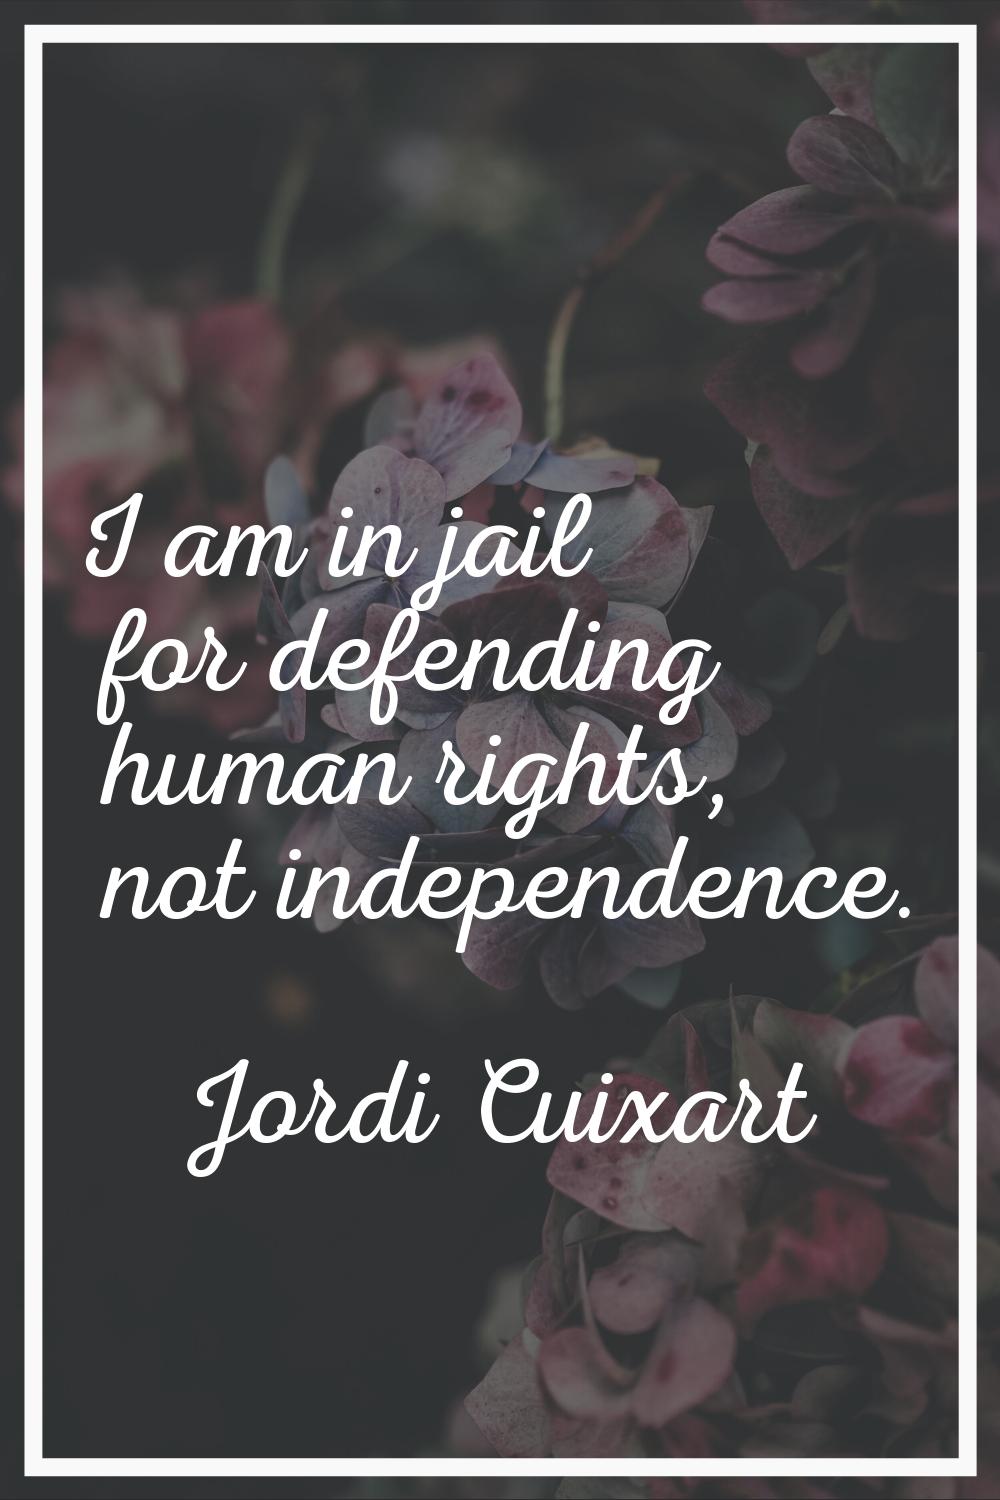 I am in jail for defending human rights, not independence.